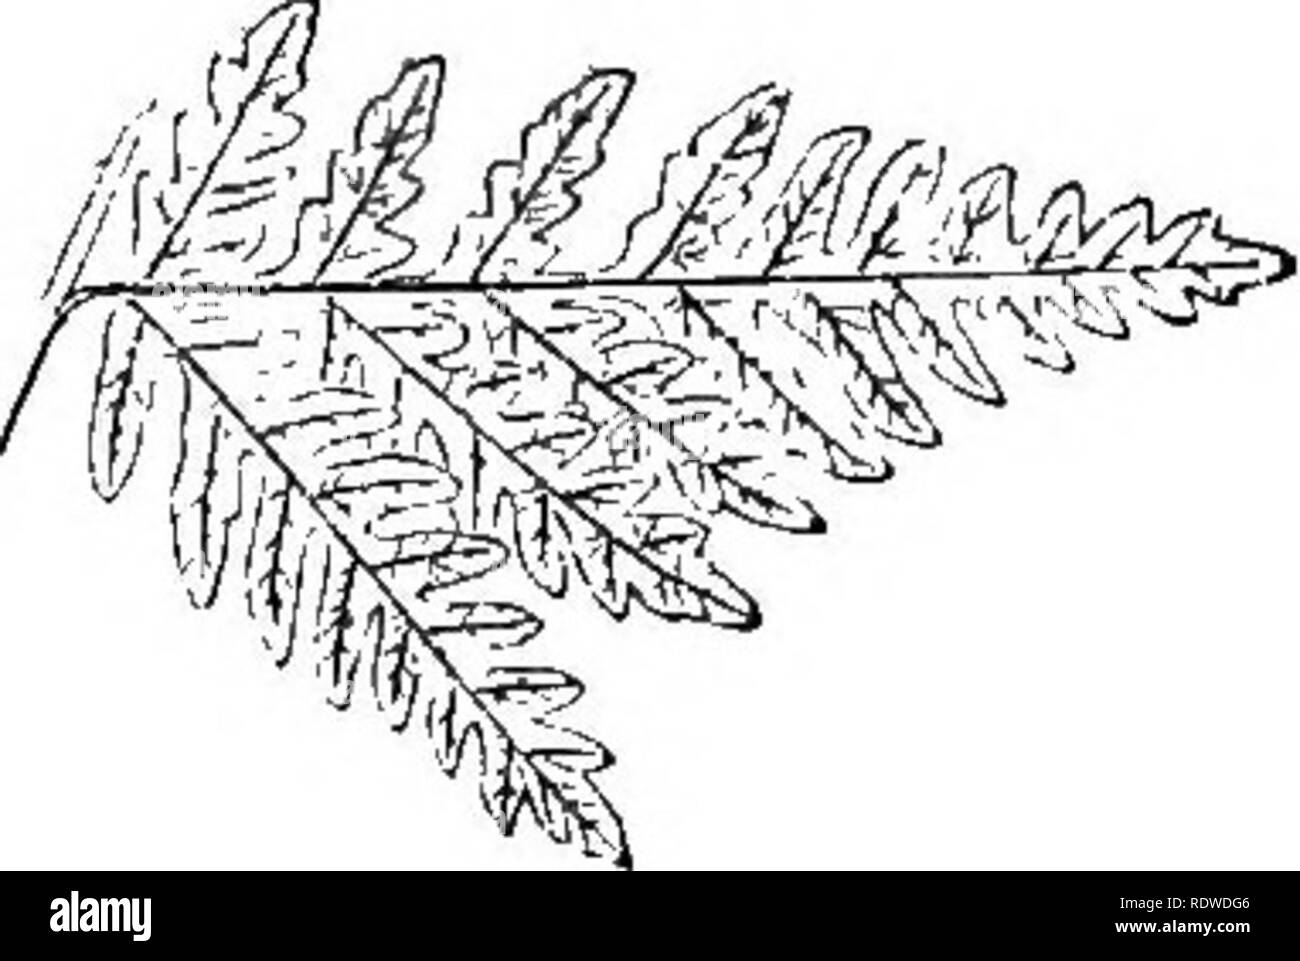 . A natural history of new and rare ferns: containing species and varieties, none of which are included in any of the eight volumes of &quot;Ferns, British and exotic,&quot; amongst which are the new Hymenophyllums and Trichomanes. With col. illus. and wood-cuts. Ferns. Lowest pinna—upper side. CHEILANTHES BOKSIGIANA. Reiciienbach. PLATE XVI. — A. Ckeilant/ies—From cheilos—a. lip, and anthos—a. flon'cr, in reference to the form of the indusium. Borsigiana— p One of the most beautiful Ferns of recent introduction, dwarf-growing, and to all appearance somewhat delicate. Quite new, and very rare. Stock Photo